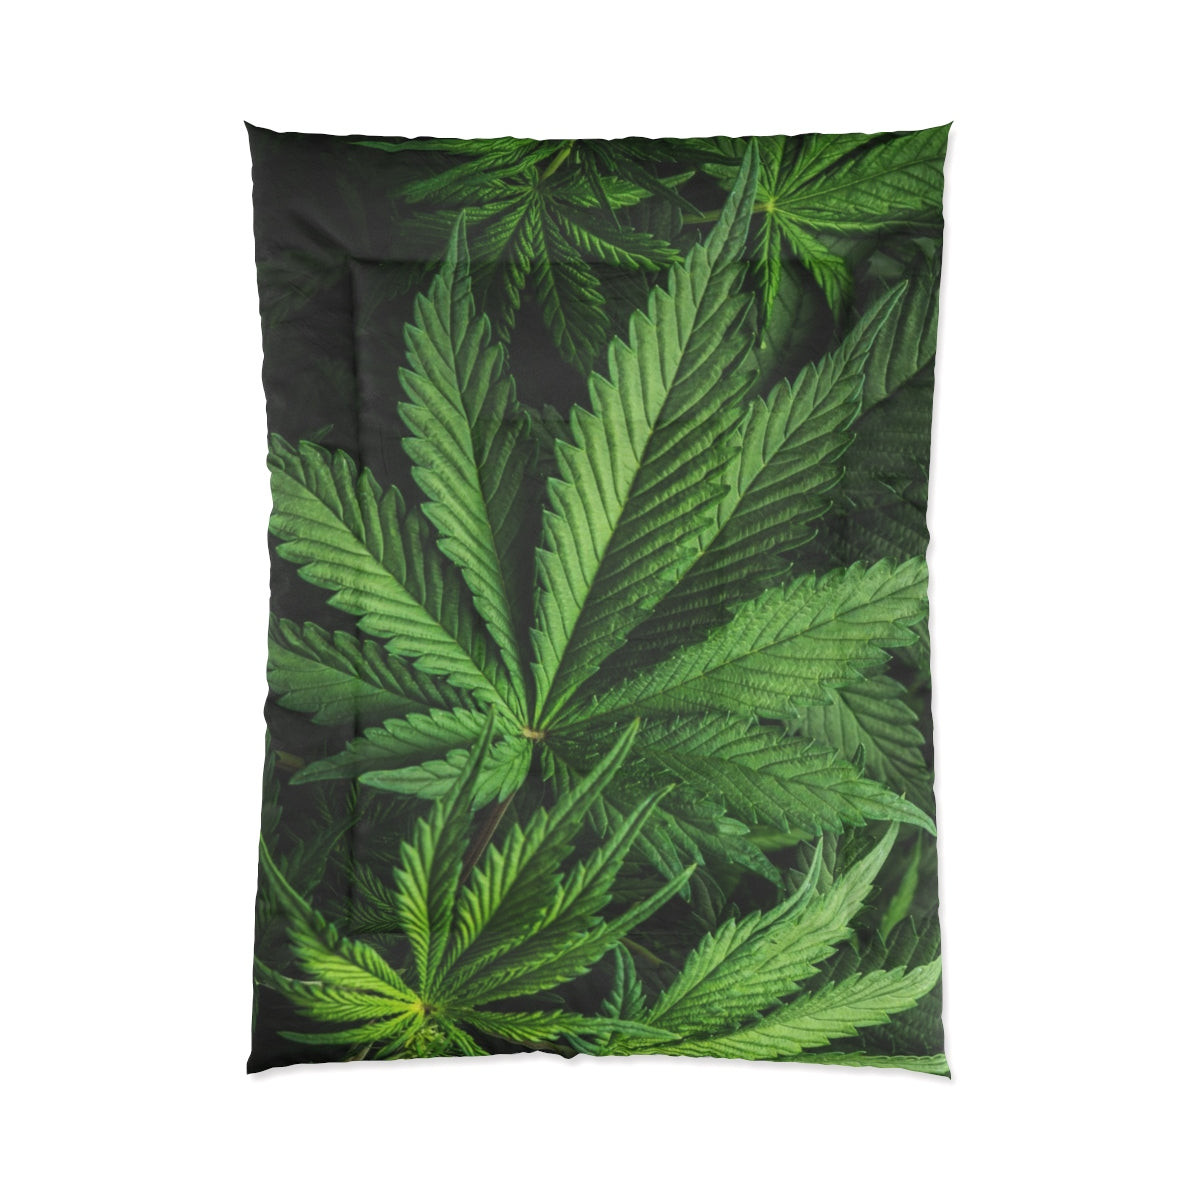 Cannabis Custom Designed Comforter.  A Unique Cannabis Gift For Friends & Family. Cannabis Decor For Your Home. Cannabis Comforter